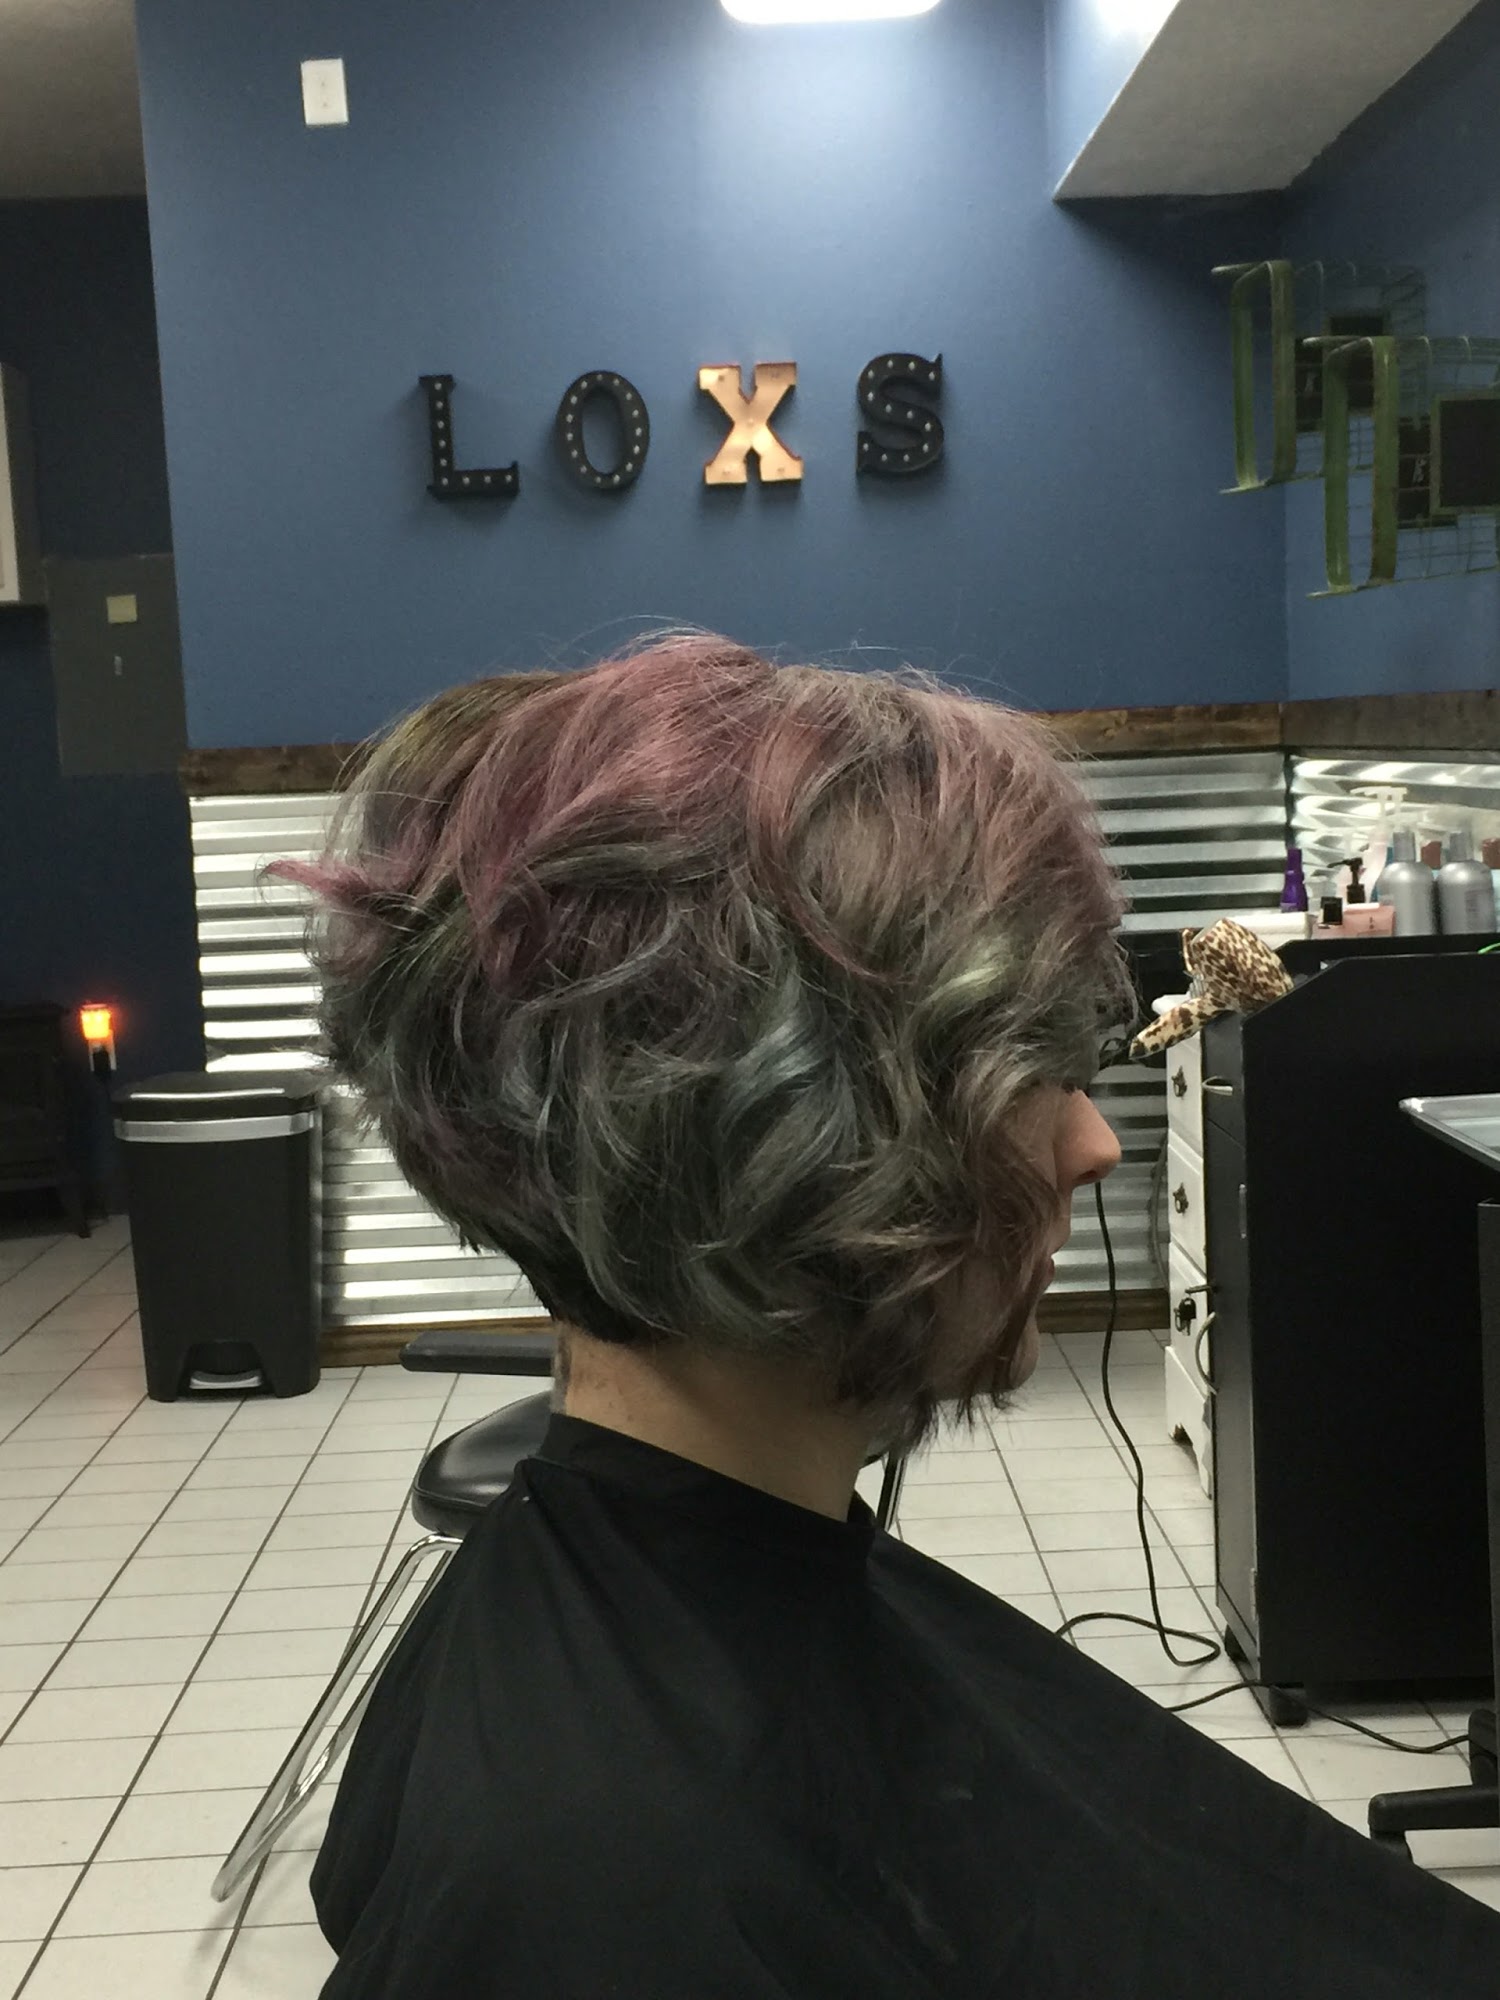 Loxs: A Colour and Cuttery